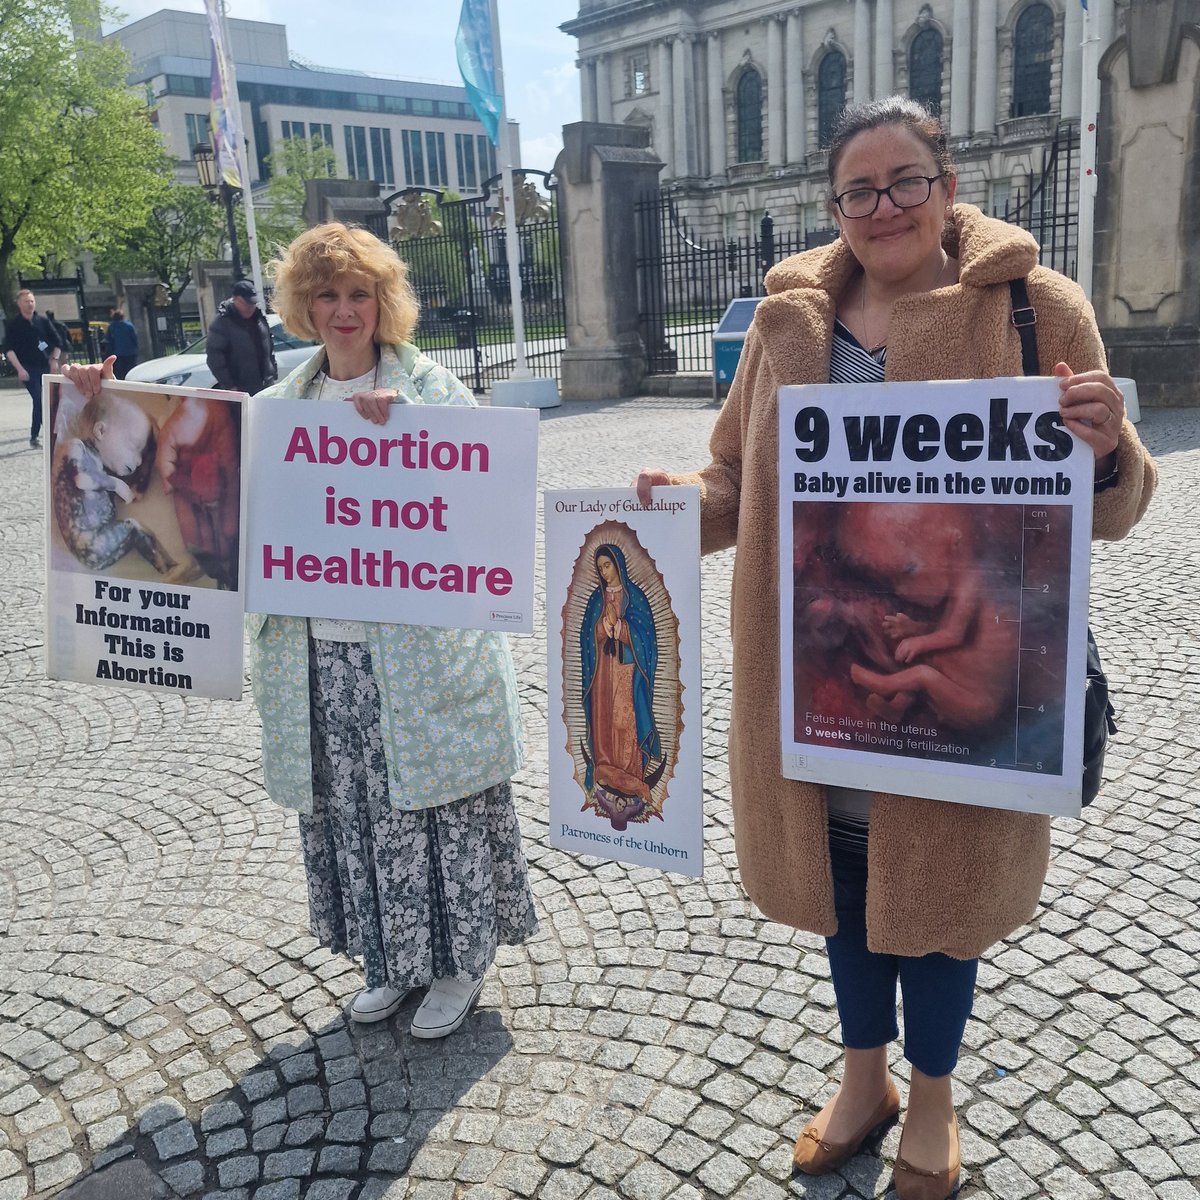 Today Precious Life witness for the unborn babies being killed by abortion in Belfast city centre. 

Abortion is not healthcare, because healthcare does not kill. Women and babies deserve better! 

#PraytoEndAbortion #RepealSection9